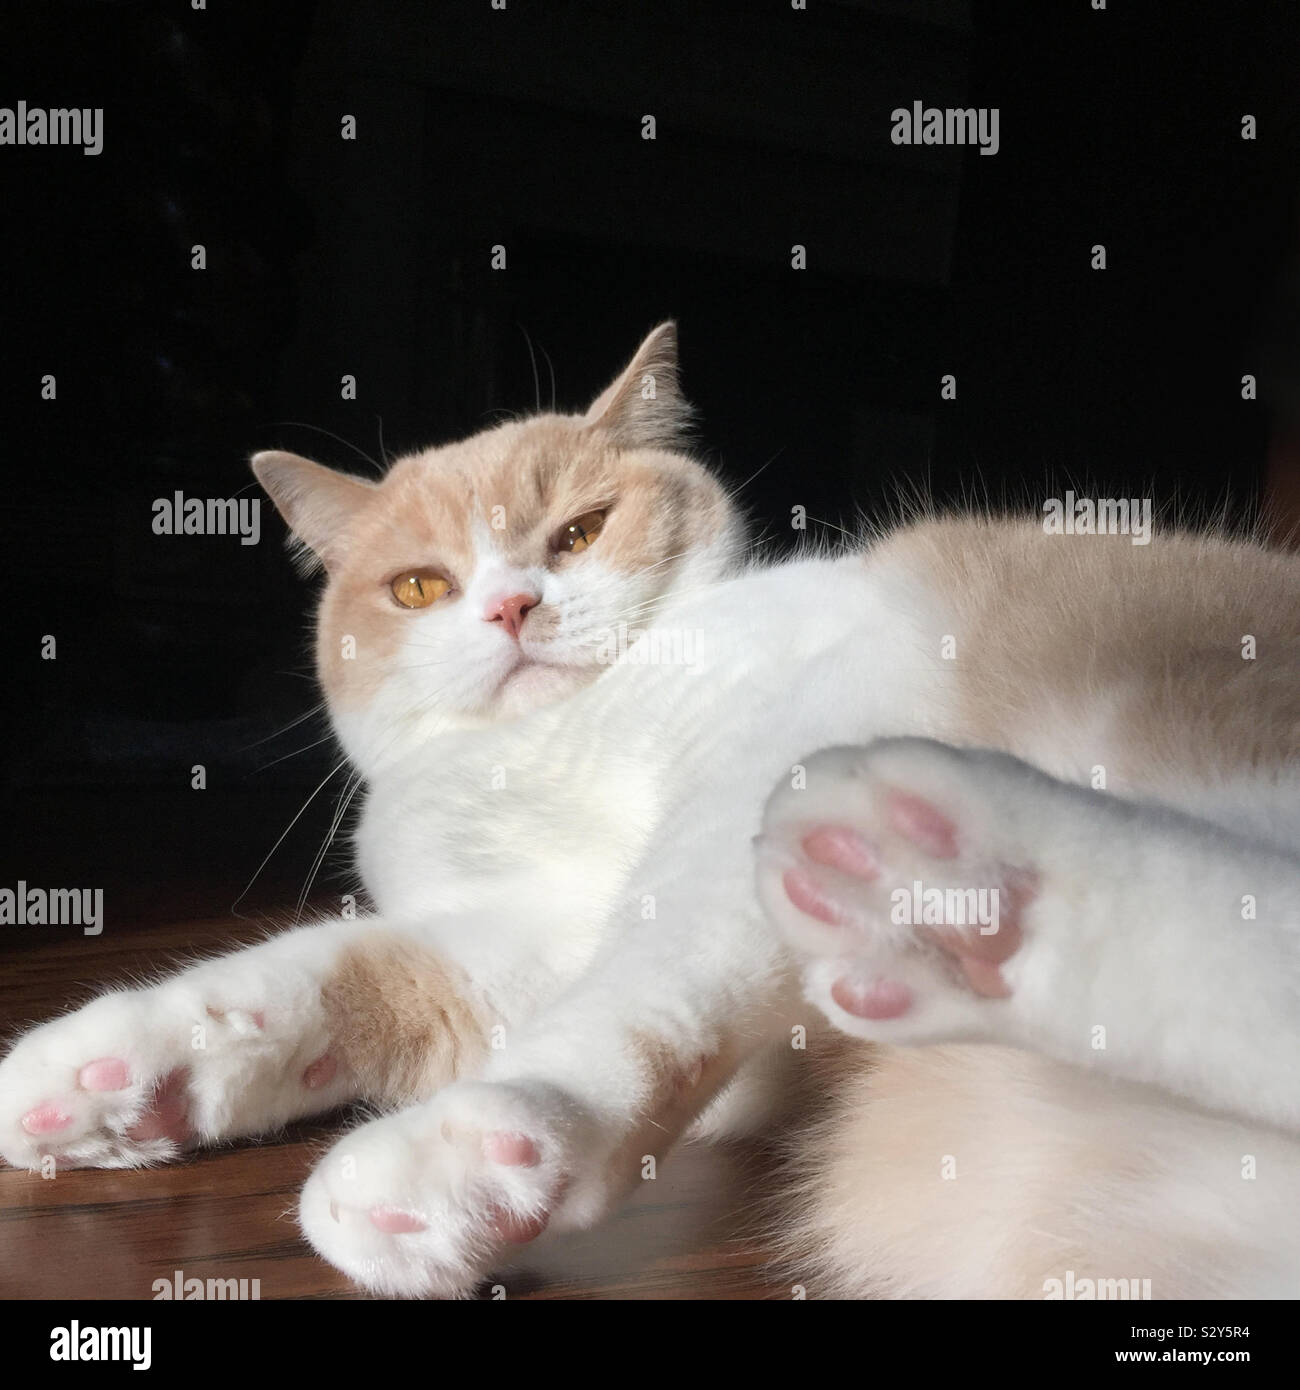 One male Exotic Shorthair domestic tabby cat. He is cream and white colored. They are also known as Shorthaired Persians. Stock Photo